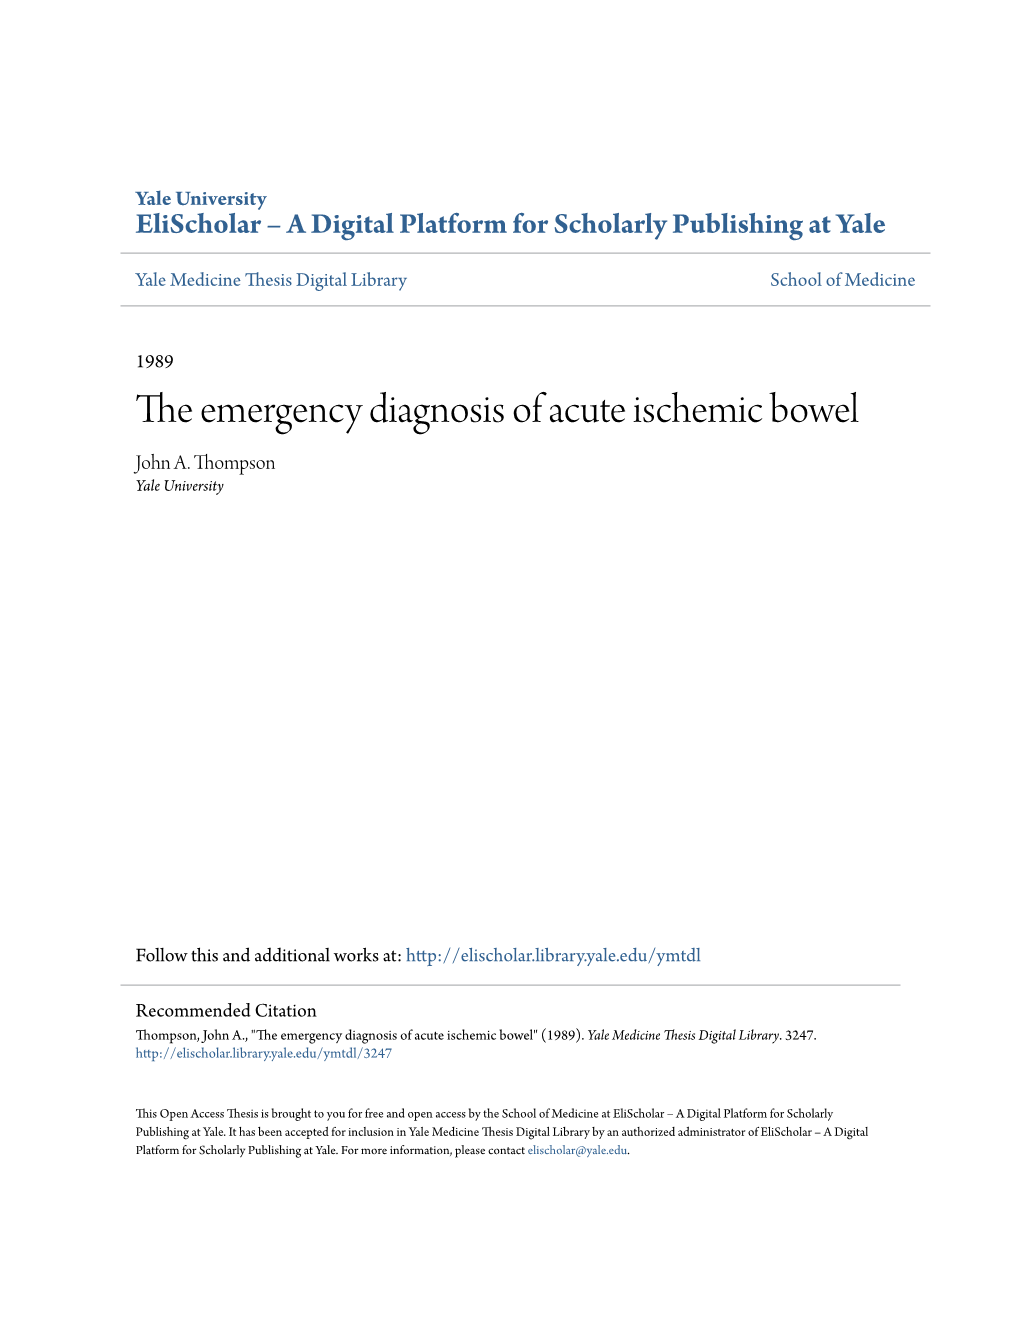 The Emergency Diagnosis of Acute Ischemic Bowel